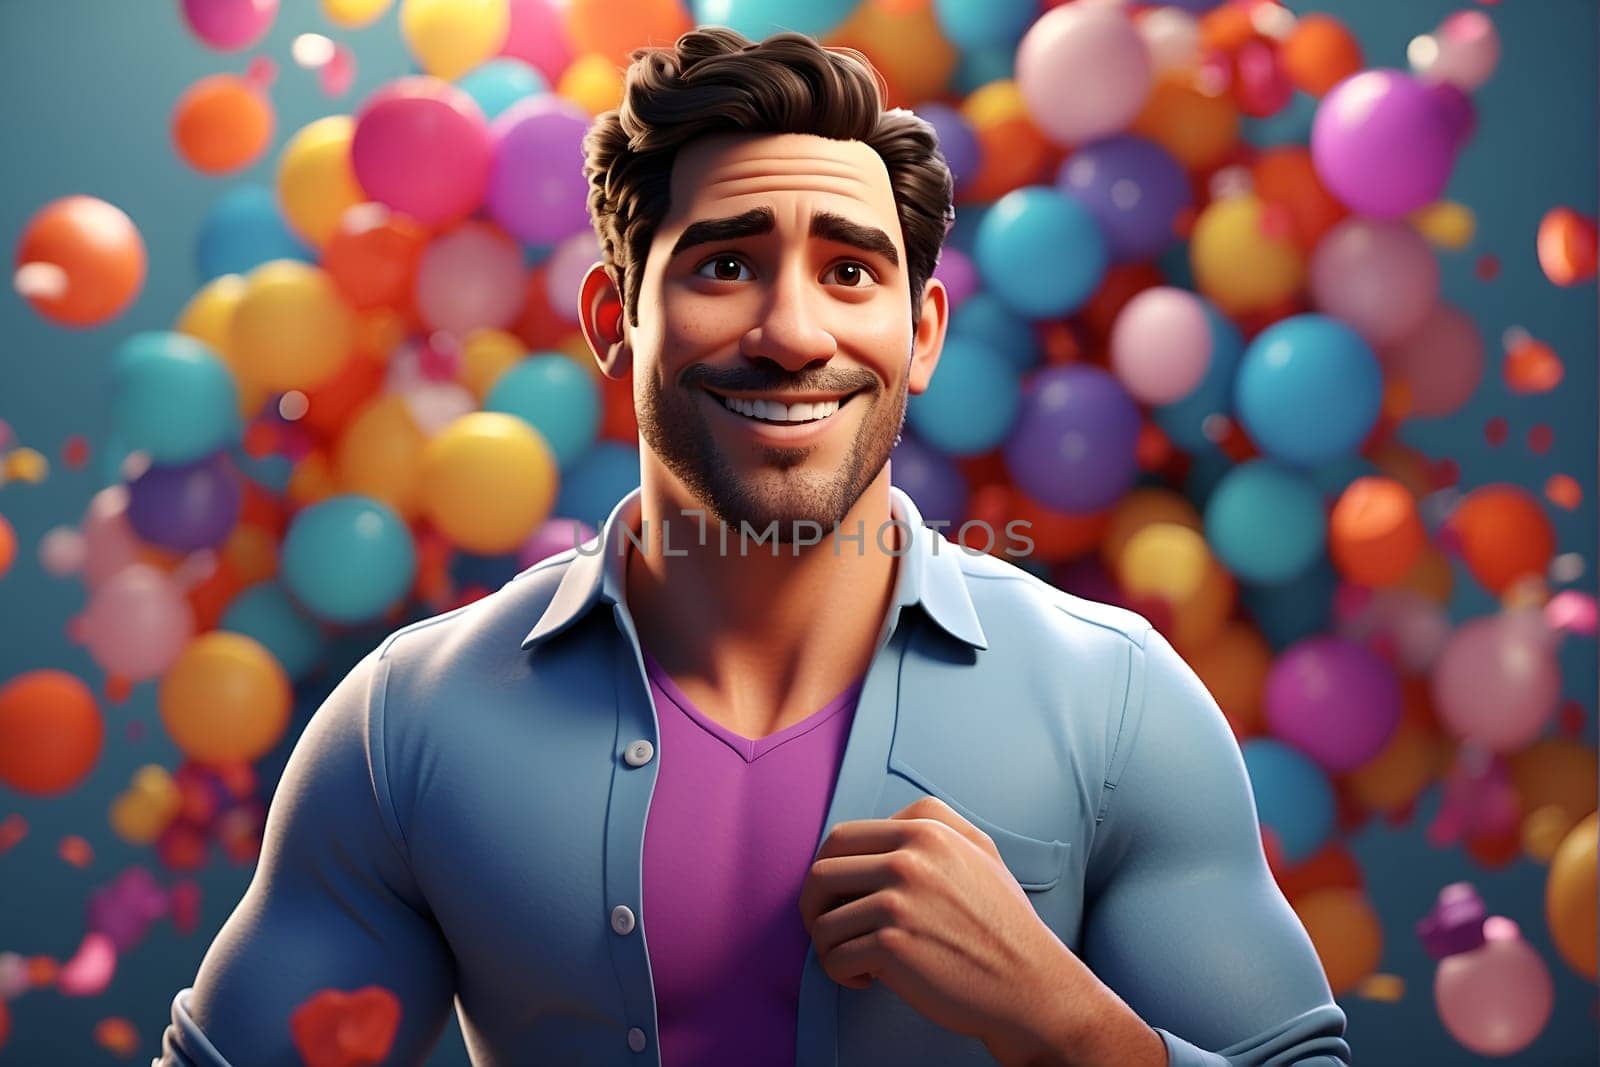 A man stands confidently in front of a vibrant bunch of balloons, creating a festive atmosphere at an outdoor event.